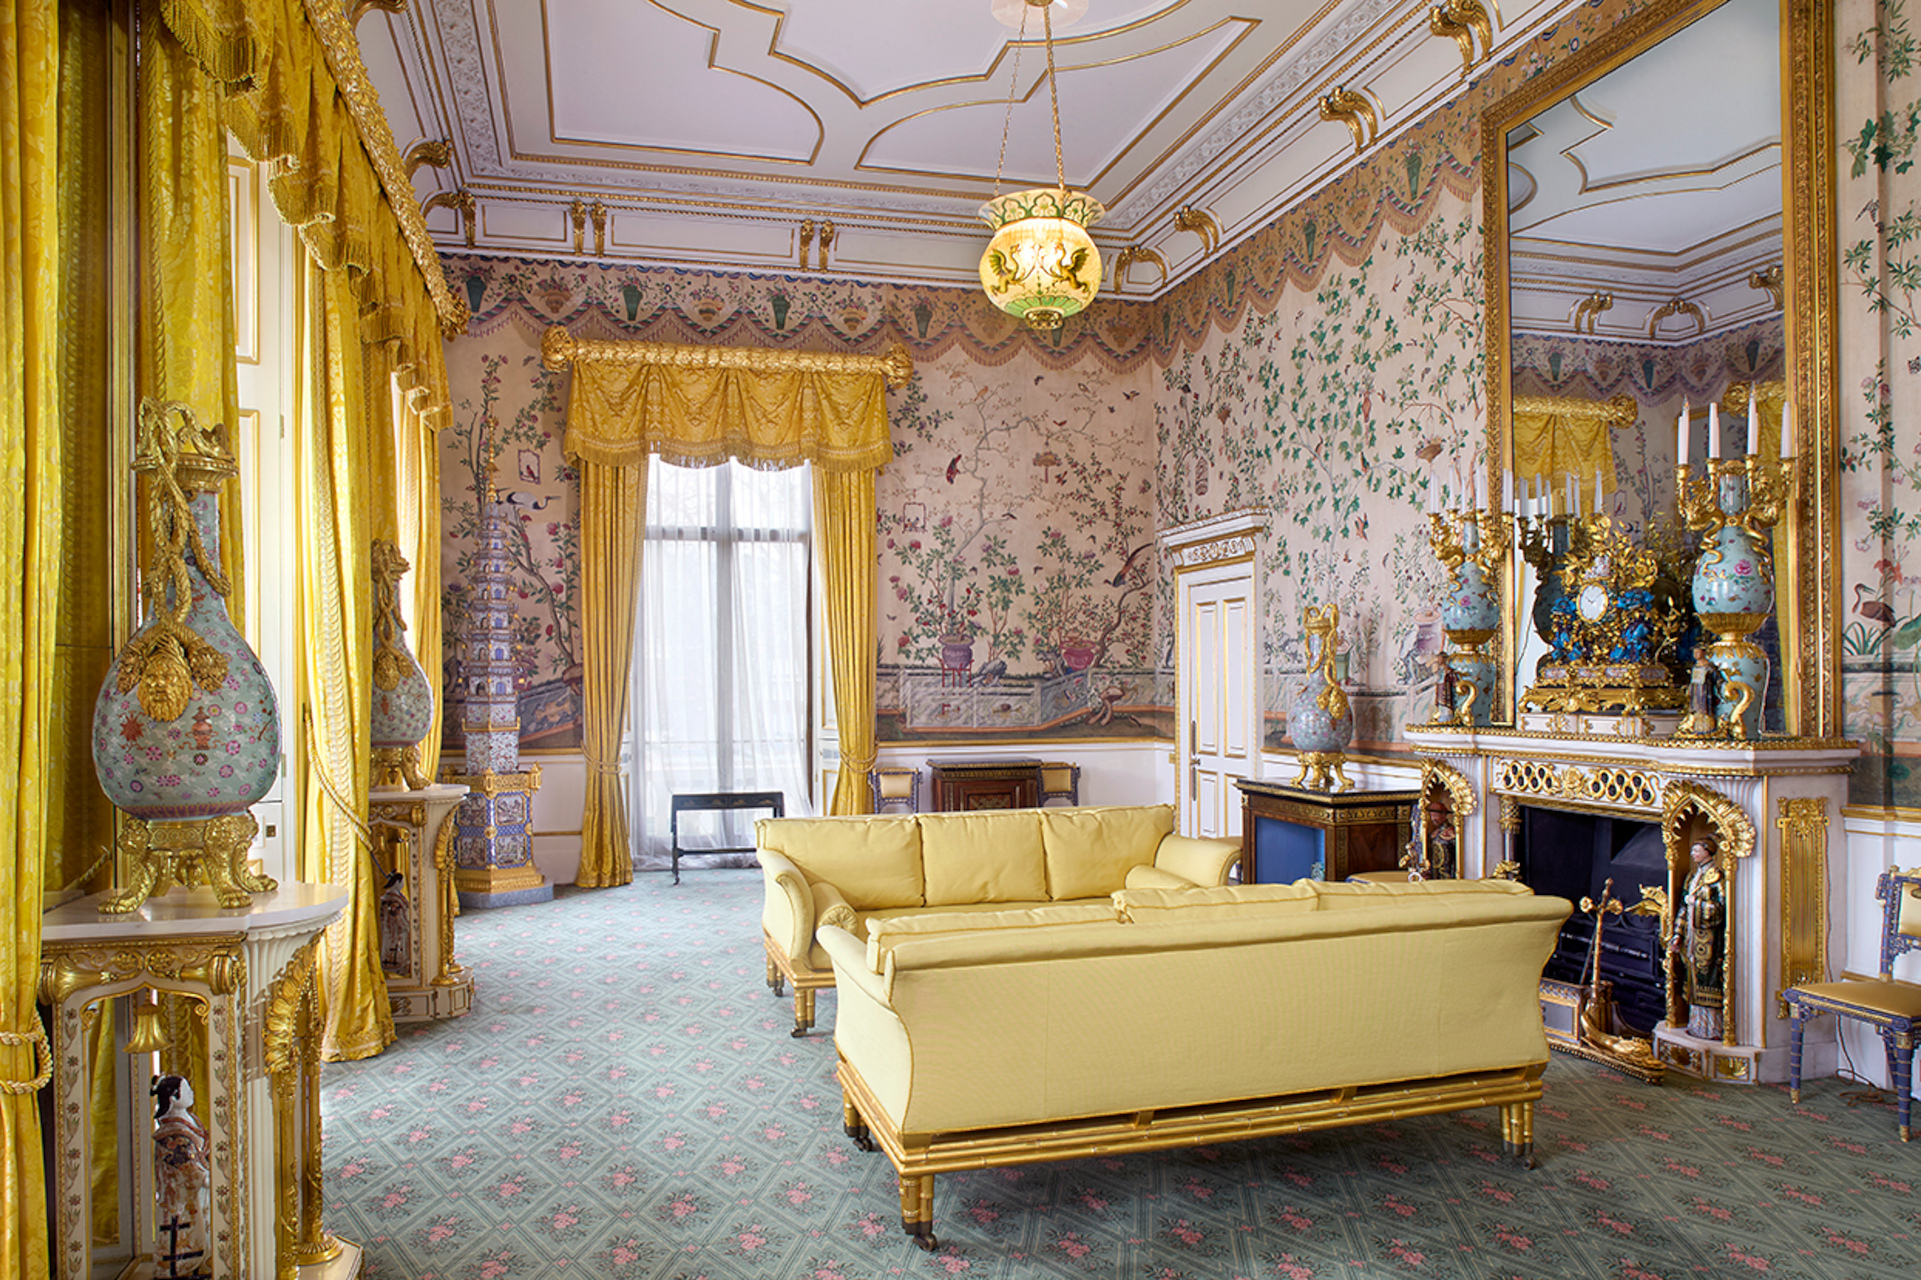 Yellow room with ornate wallpaper